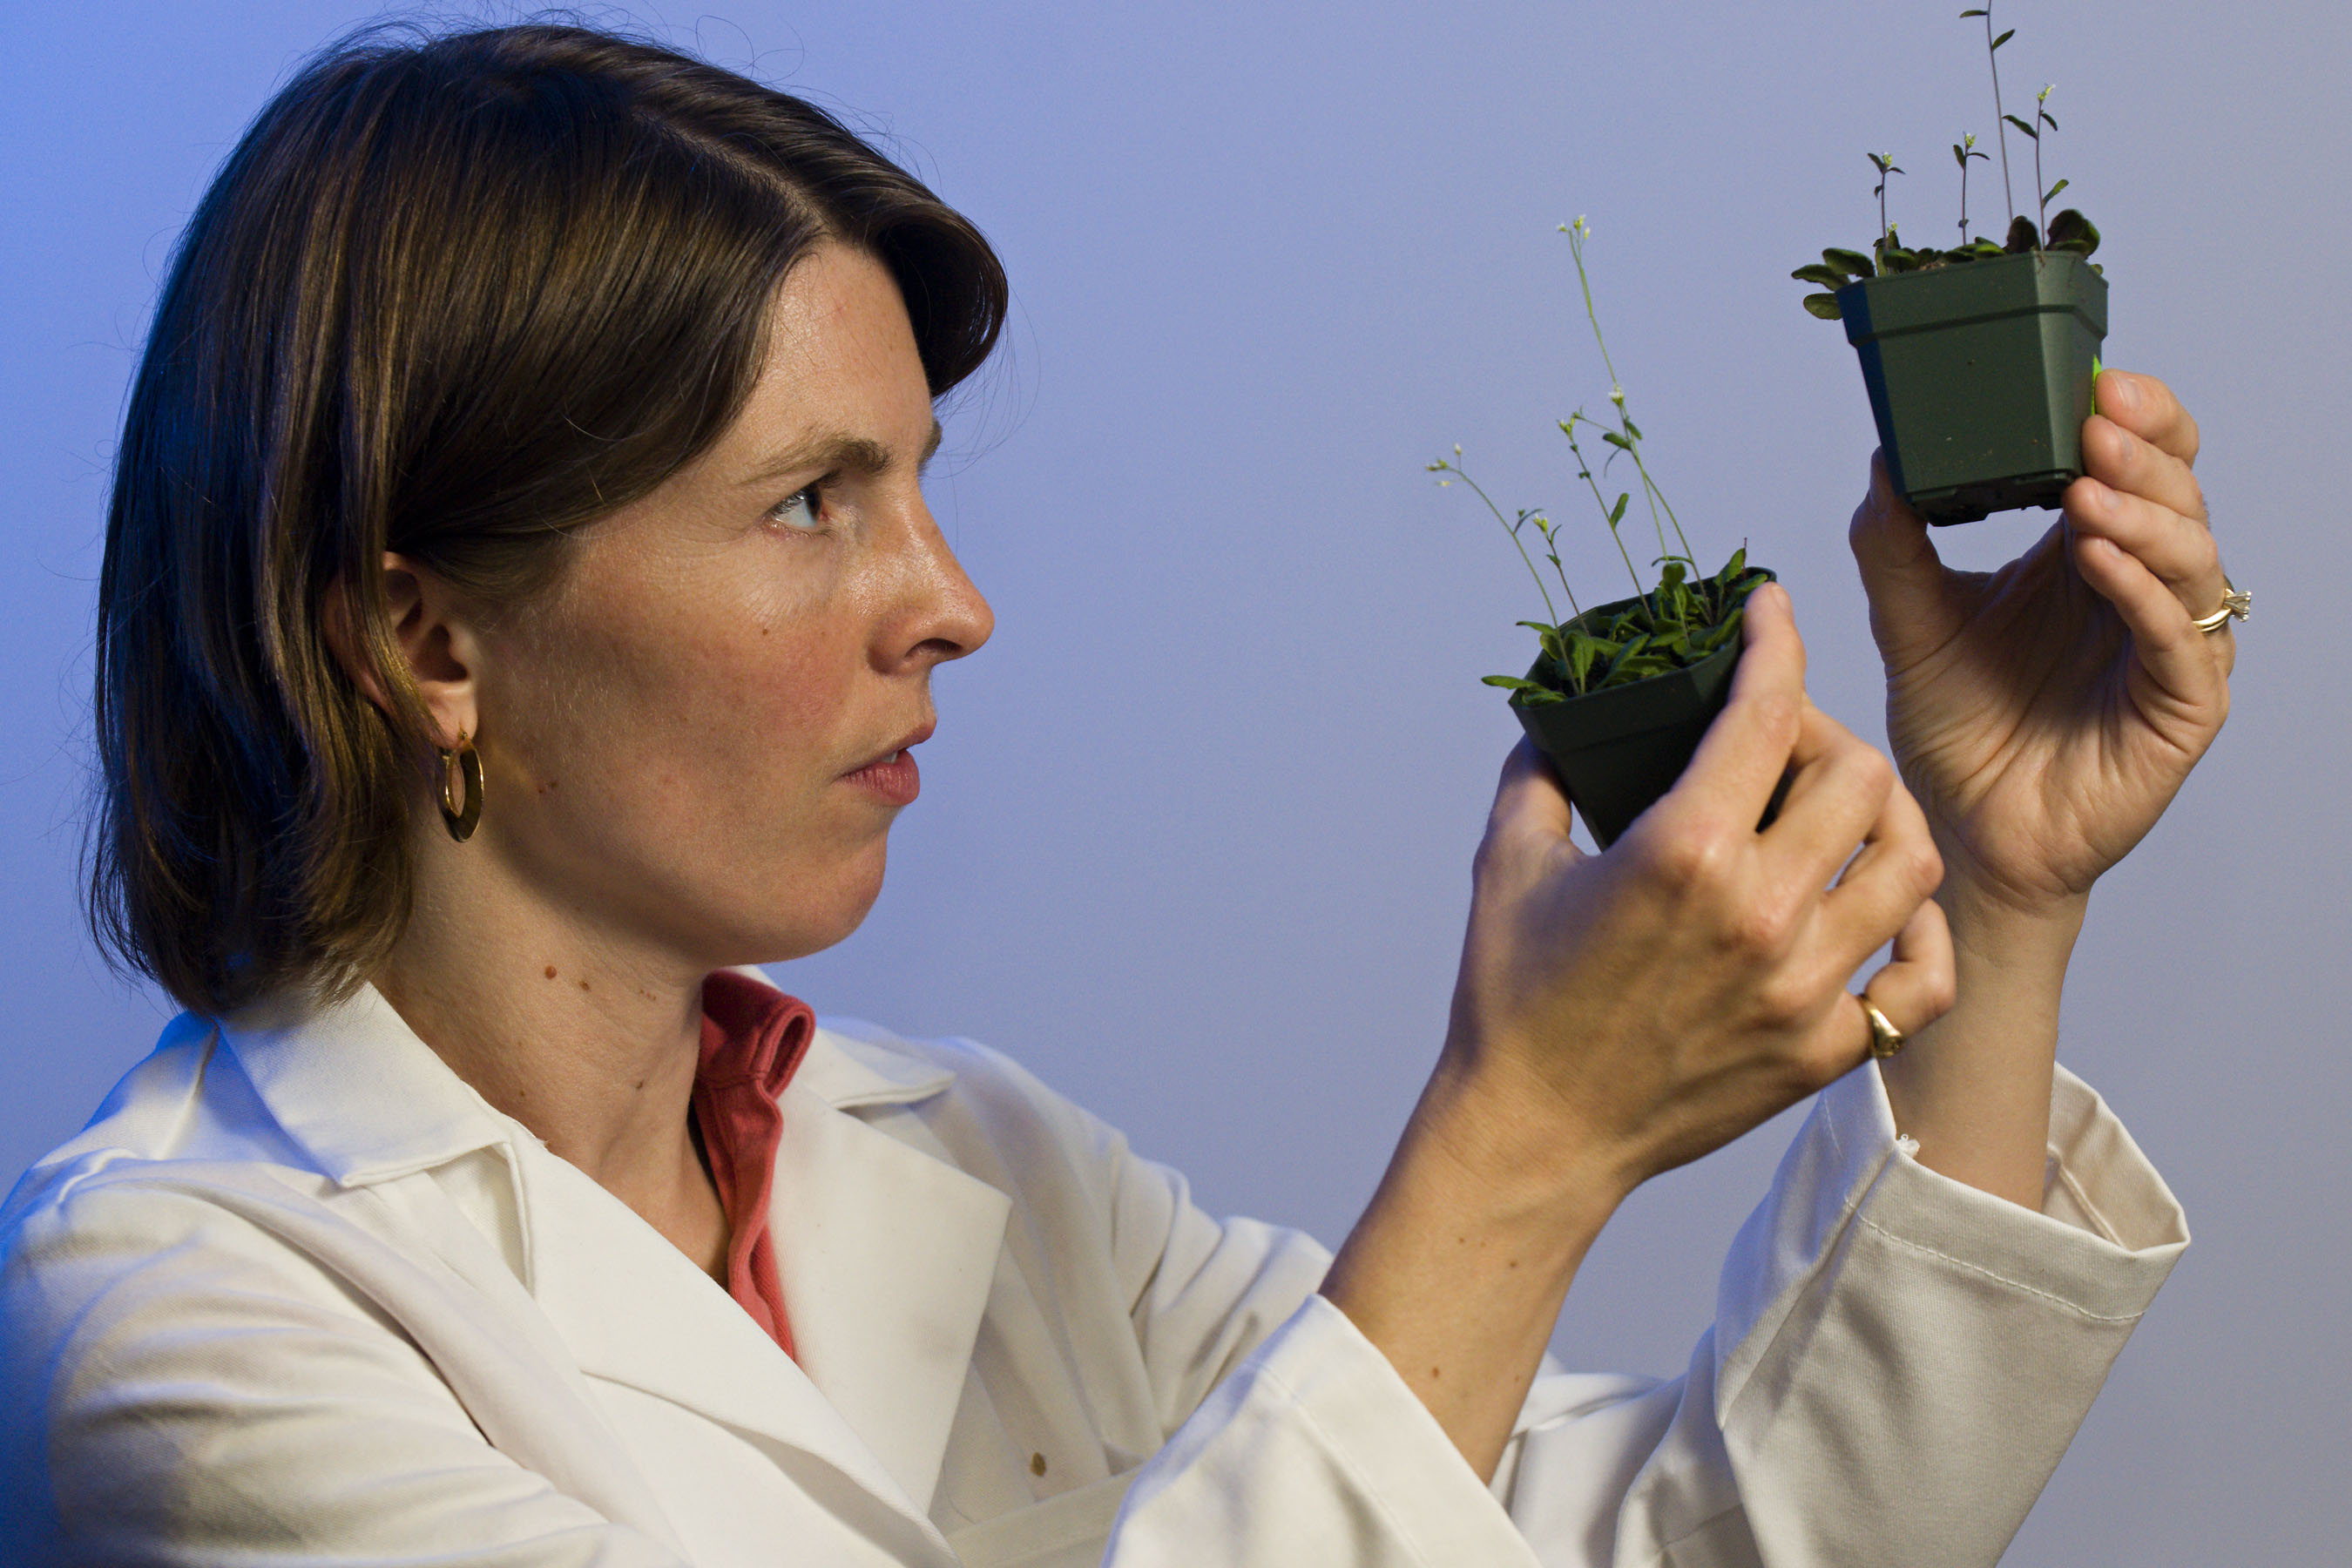 Erin Dolan, outreach director for the Fralin Life Science Institute, examines <em>Arabidopsis thaliana</em>, a model plant for many research projects. High school students participating in the Partnership for Research and Education in Plants (PREP) create controlled environments to observe responses of genetically altered versions of the plant to help university scientists determine the role of specific genes.